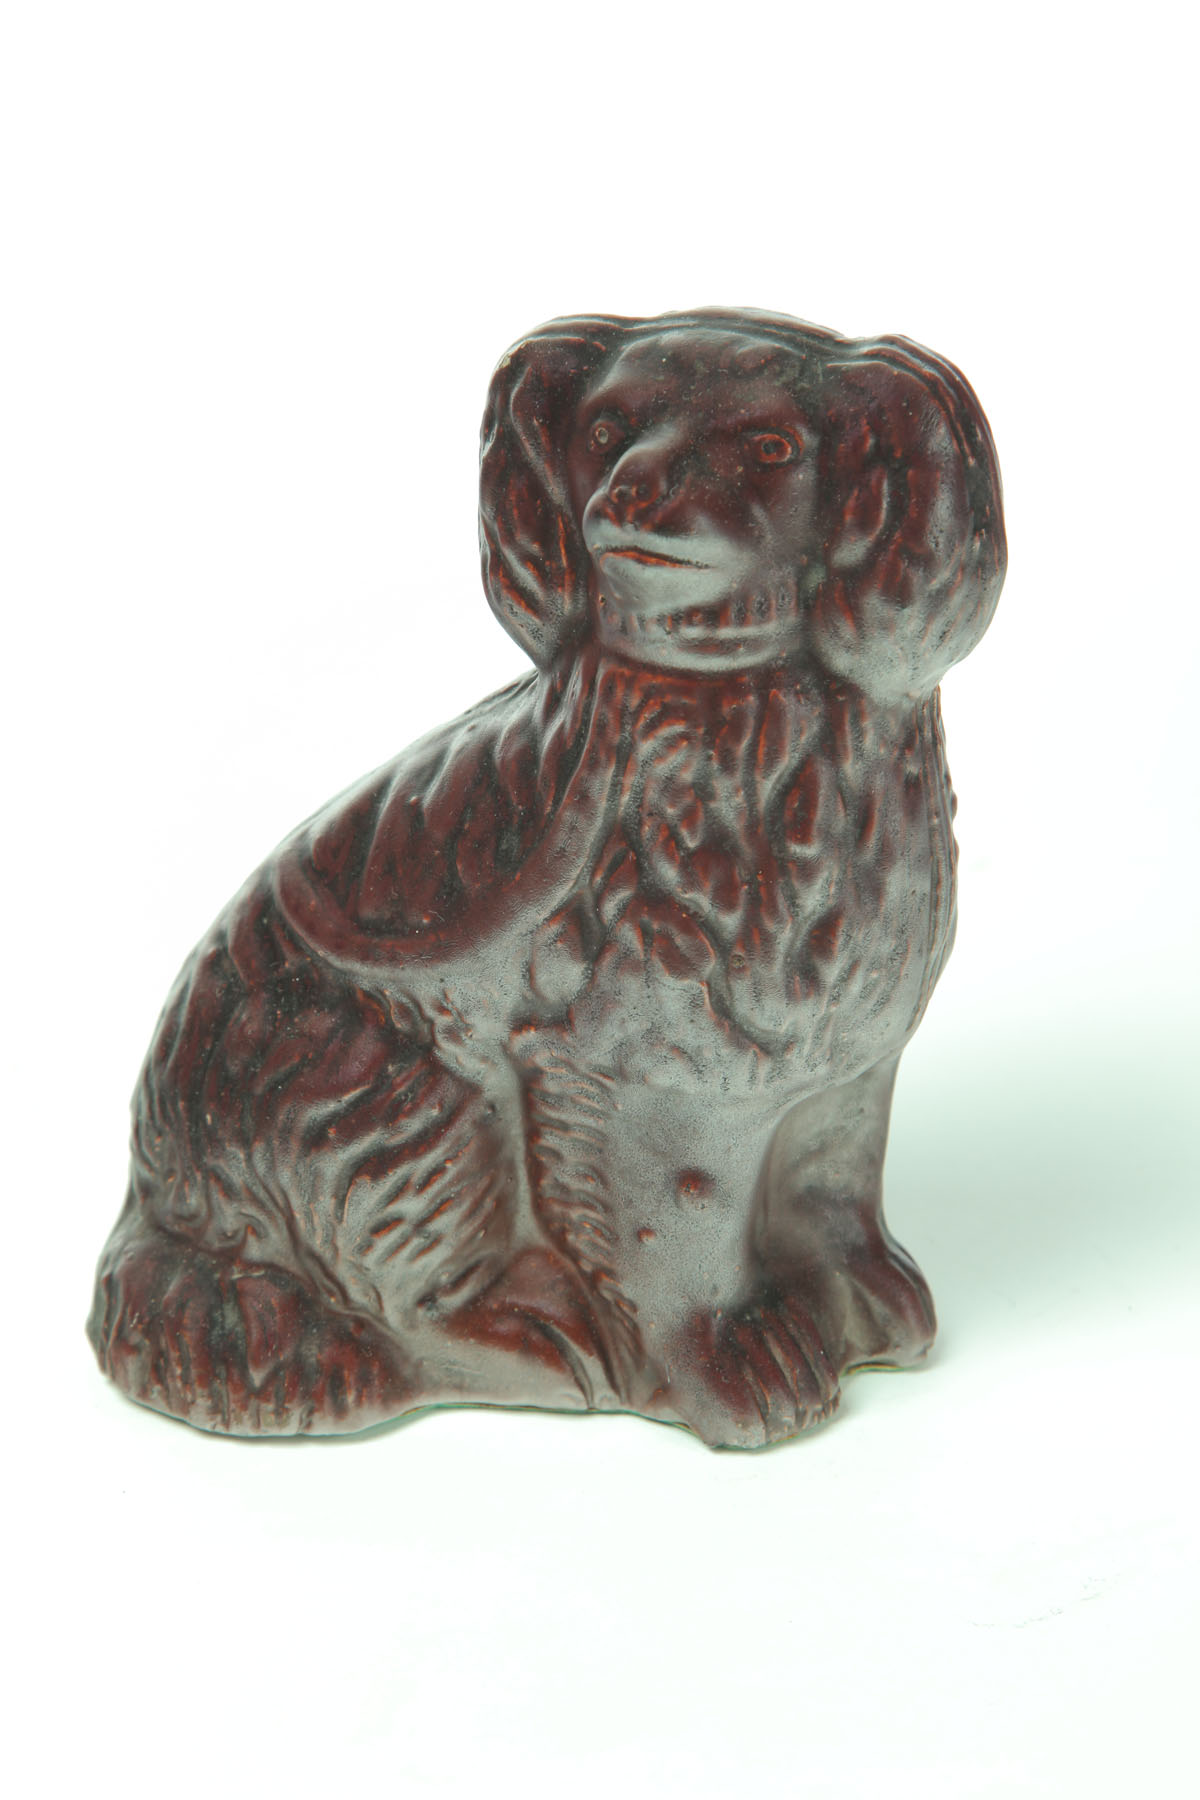 SEWERTILE DOG.  Ohio  late 19th-early